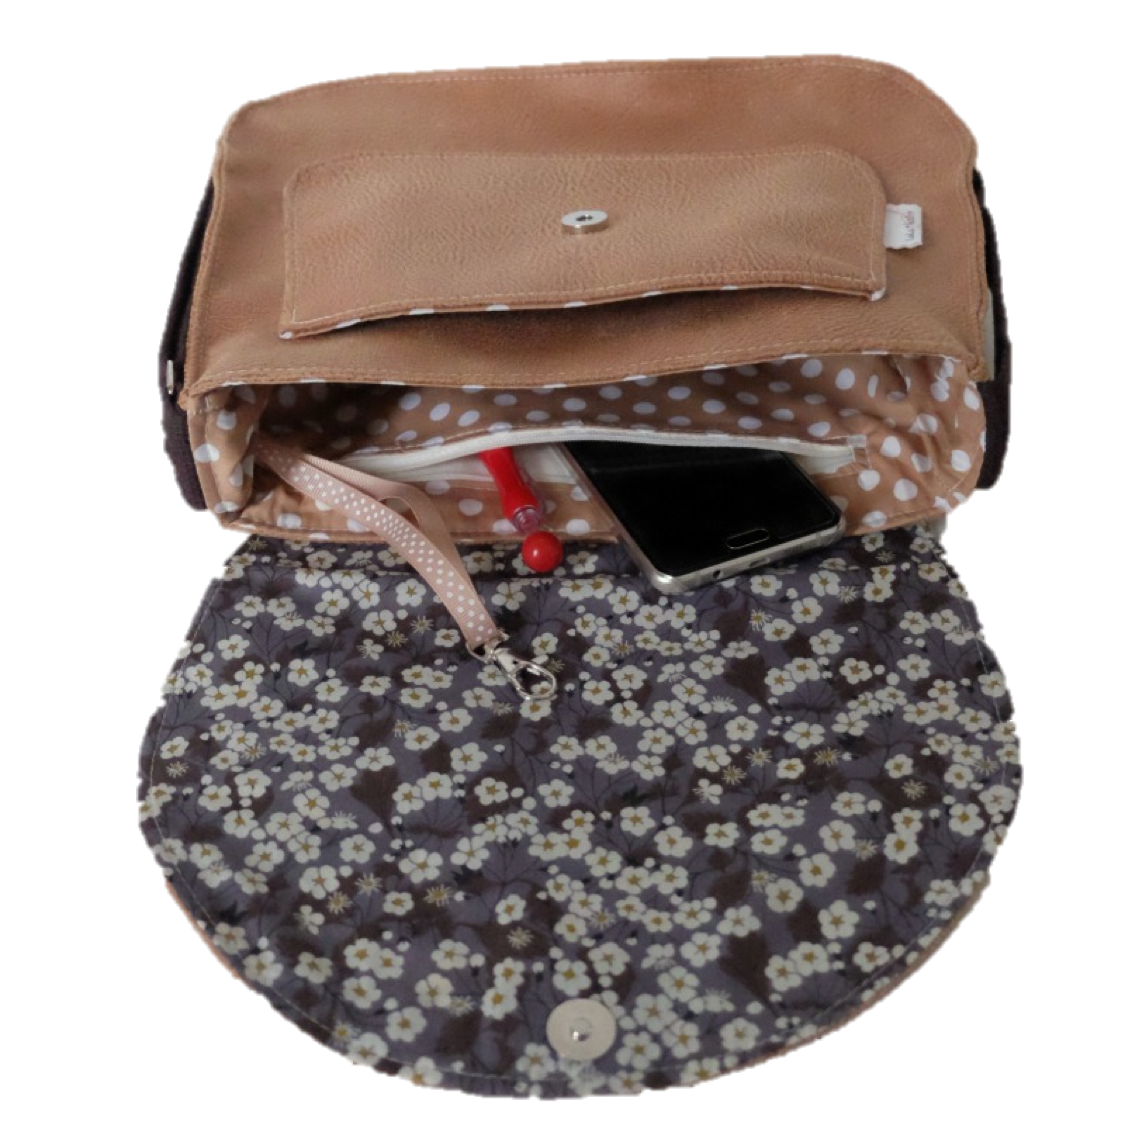 https://www.lulu-factory.com/wp-content/uploads/sac-besace-luluflor-simili-cuir-camel-salamandre-liberty-mitsi-gris-qualite-made-in-france-zip.png